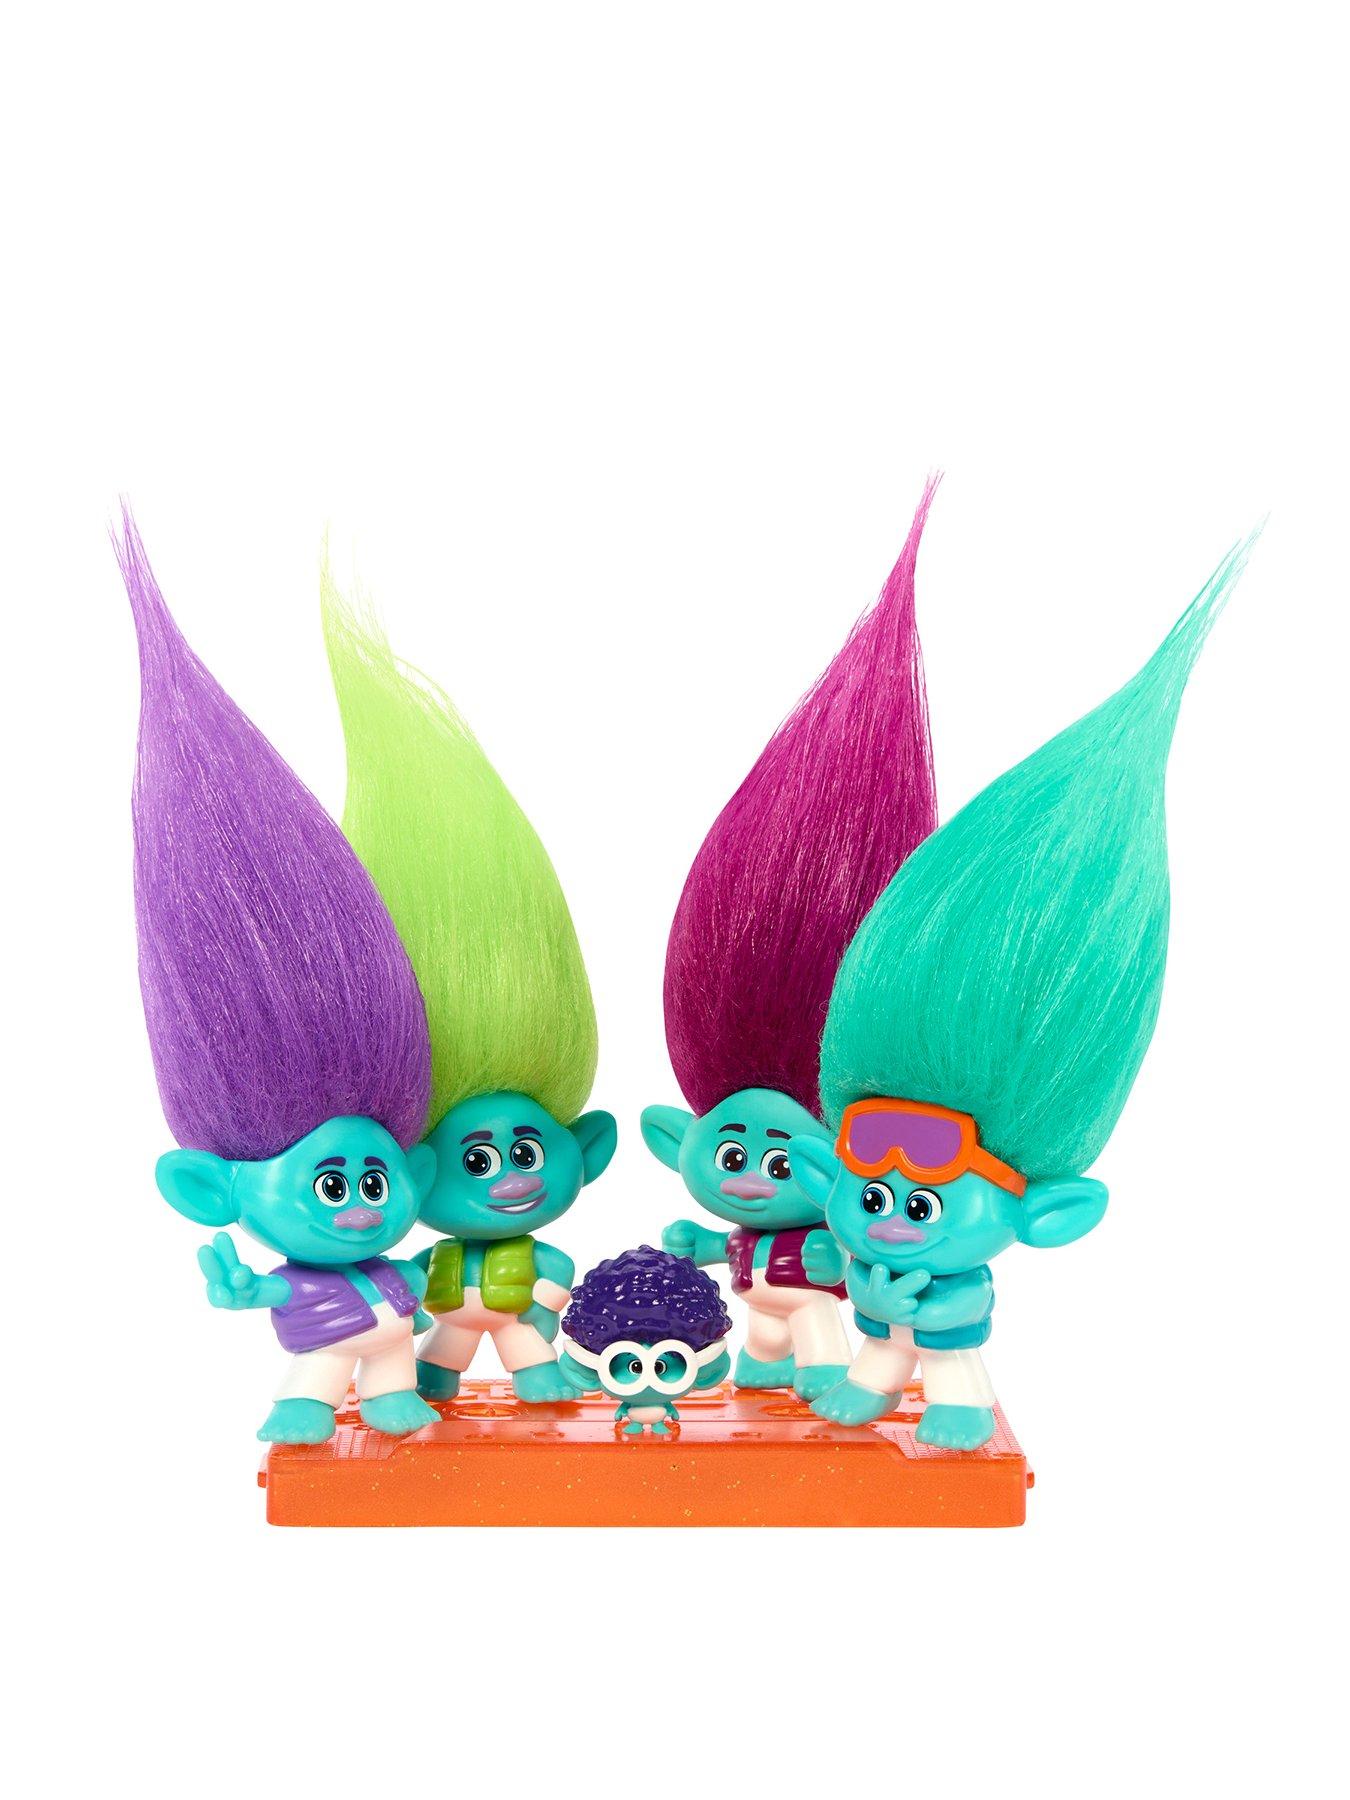 DreamWorks Trolls Band Together Hairageous Wardrobe Queen Poppy Small Doll  & Accessories Playset | Mattel